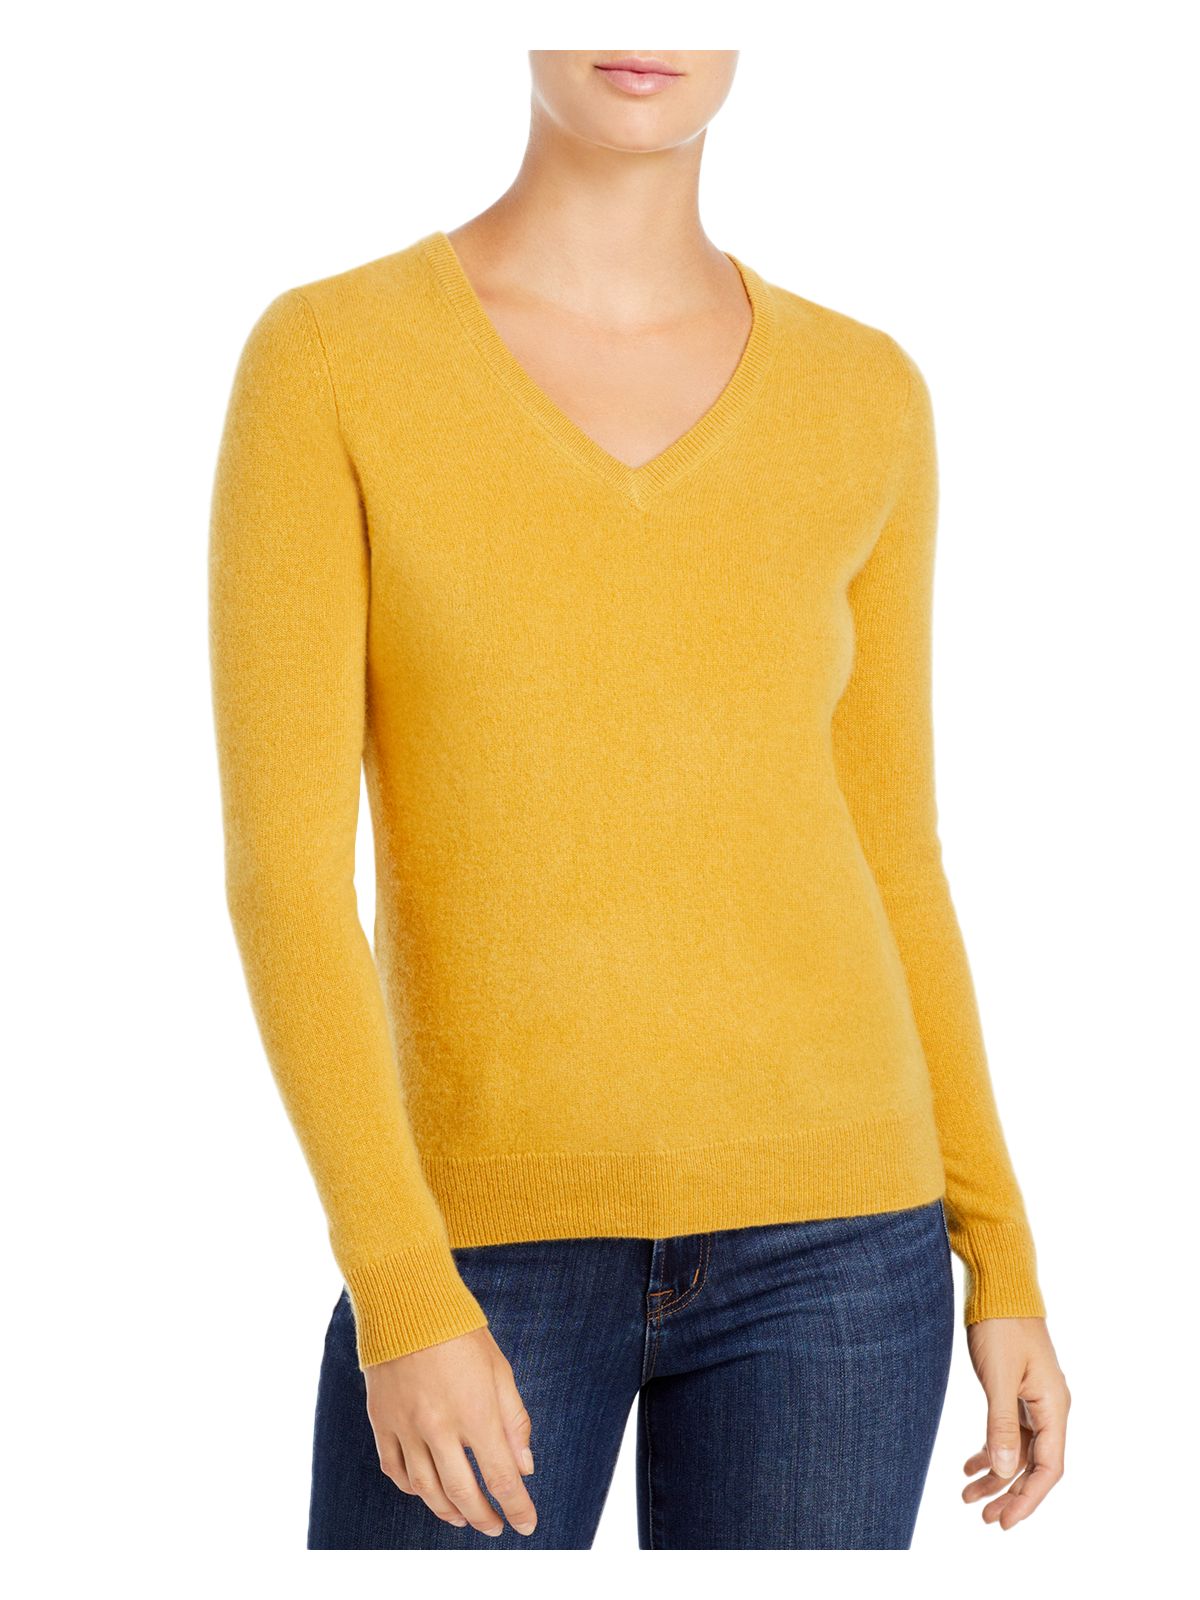 Designer Brand Womens Yellow Cashmere Long Sleeve V Neck Wear To Work Sweater S